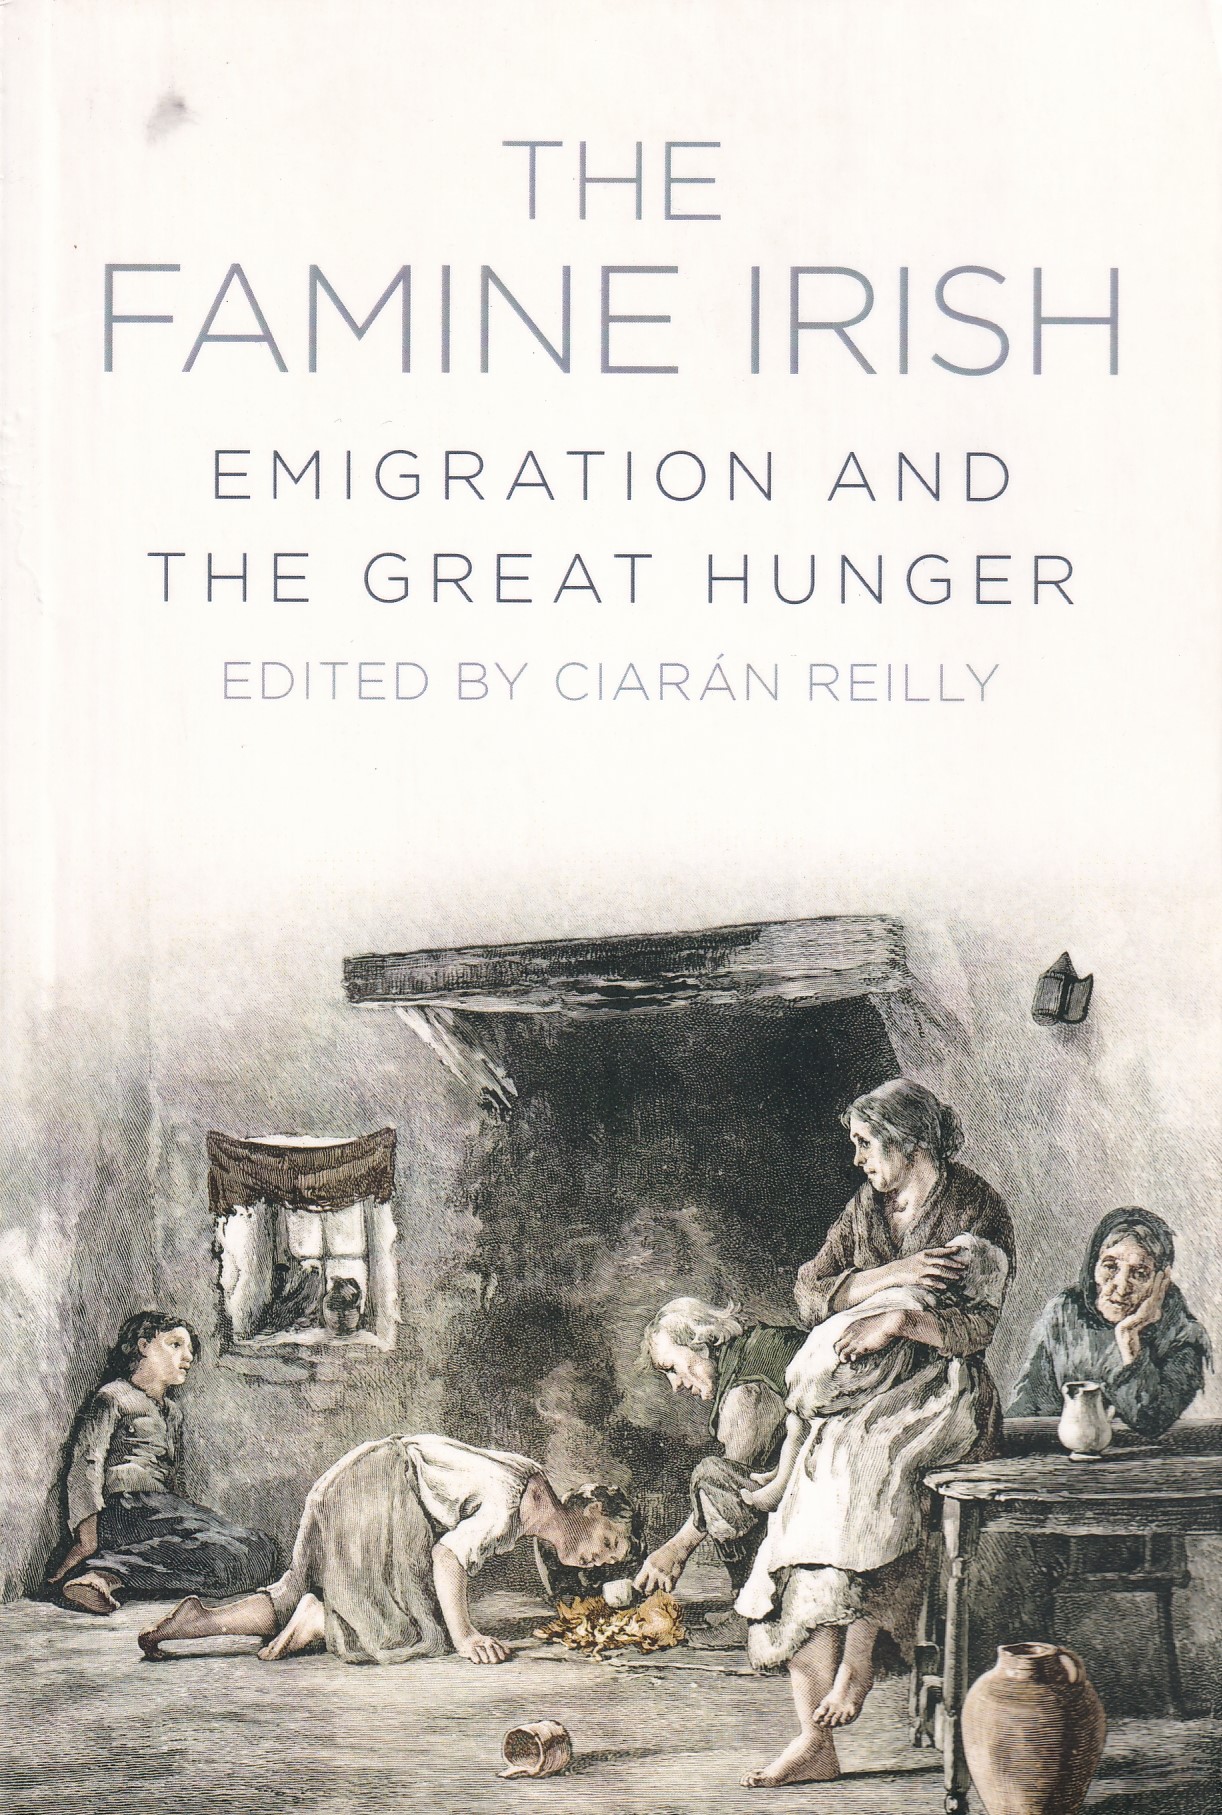 The Famine Irish: Emigration and the Great Hunger by Ciarán Reilly (ed.)